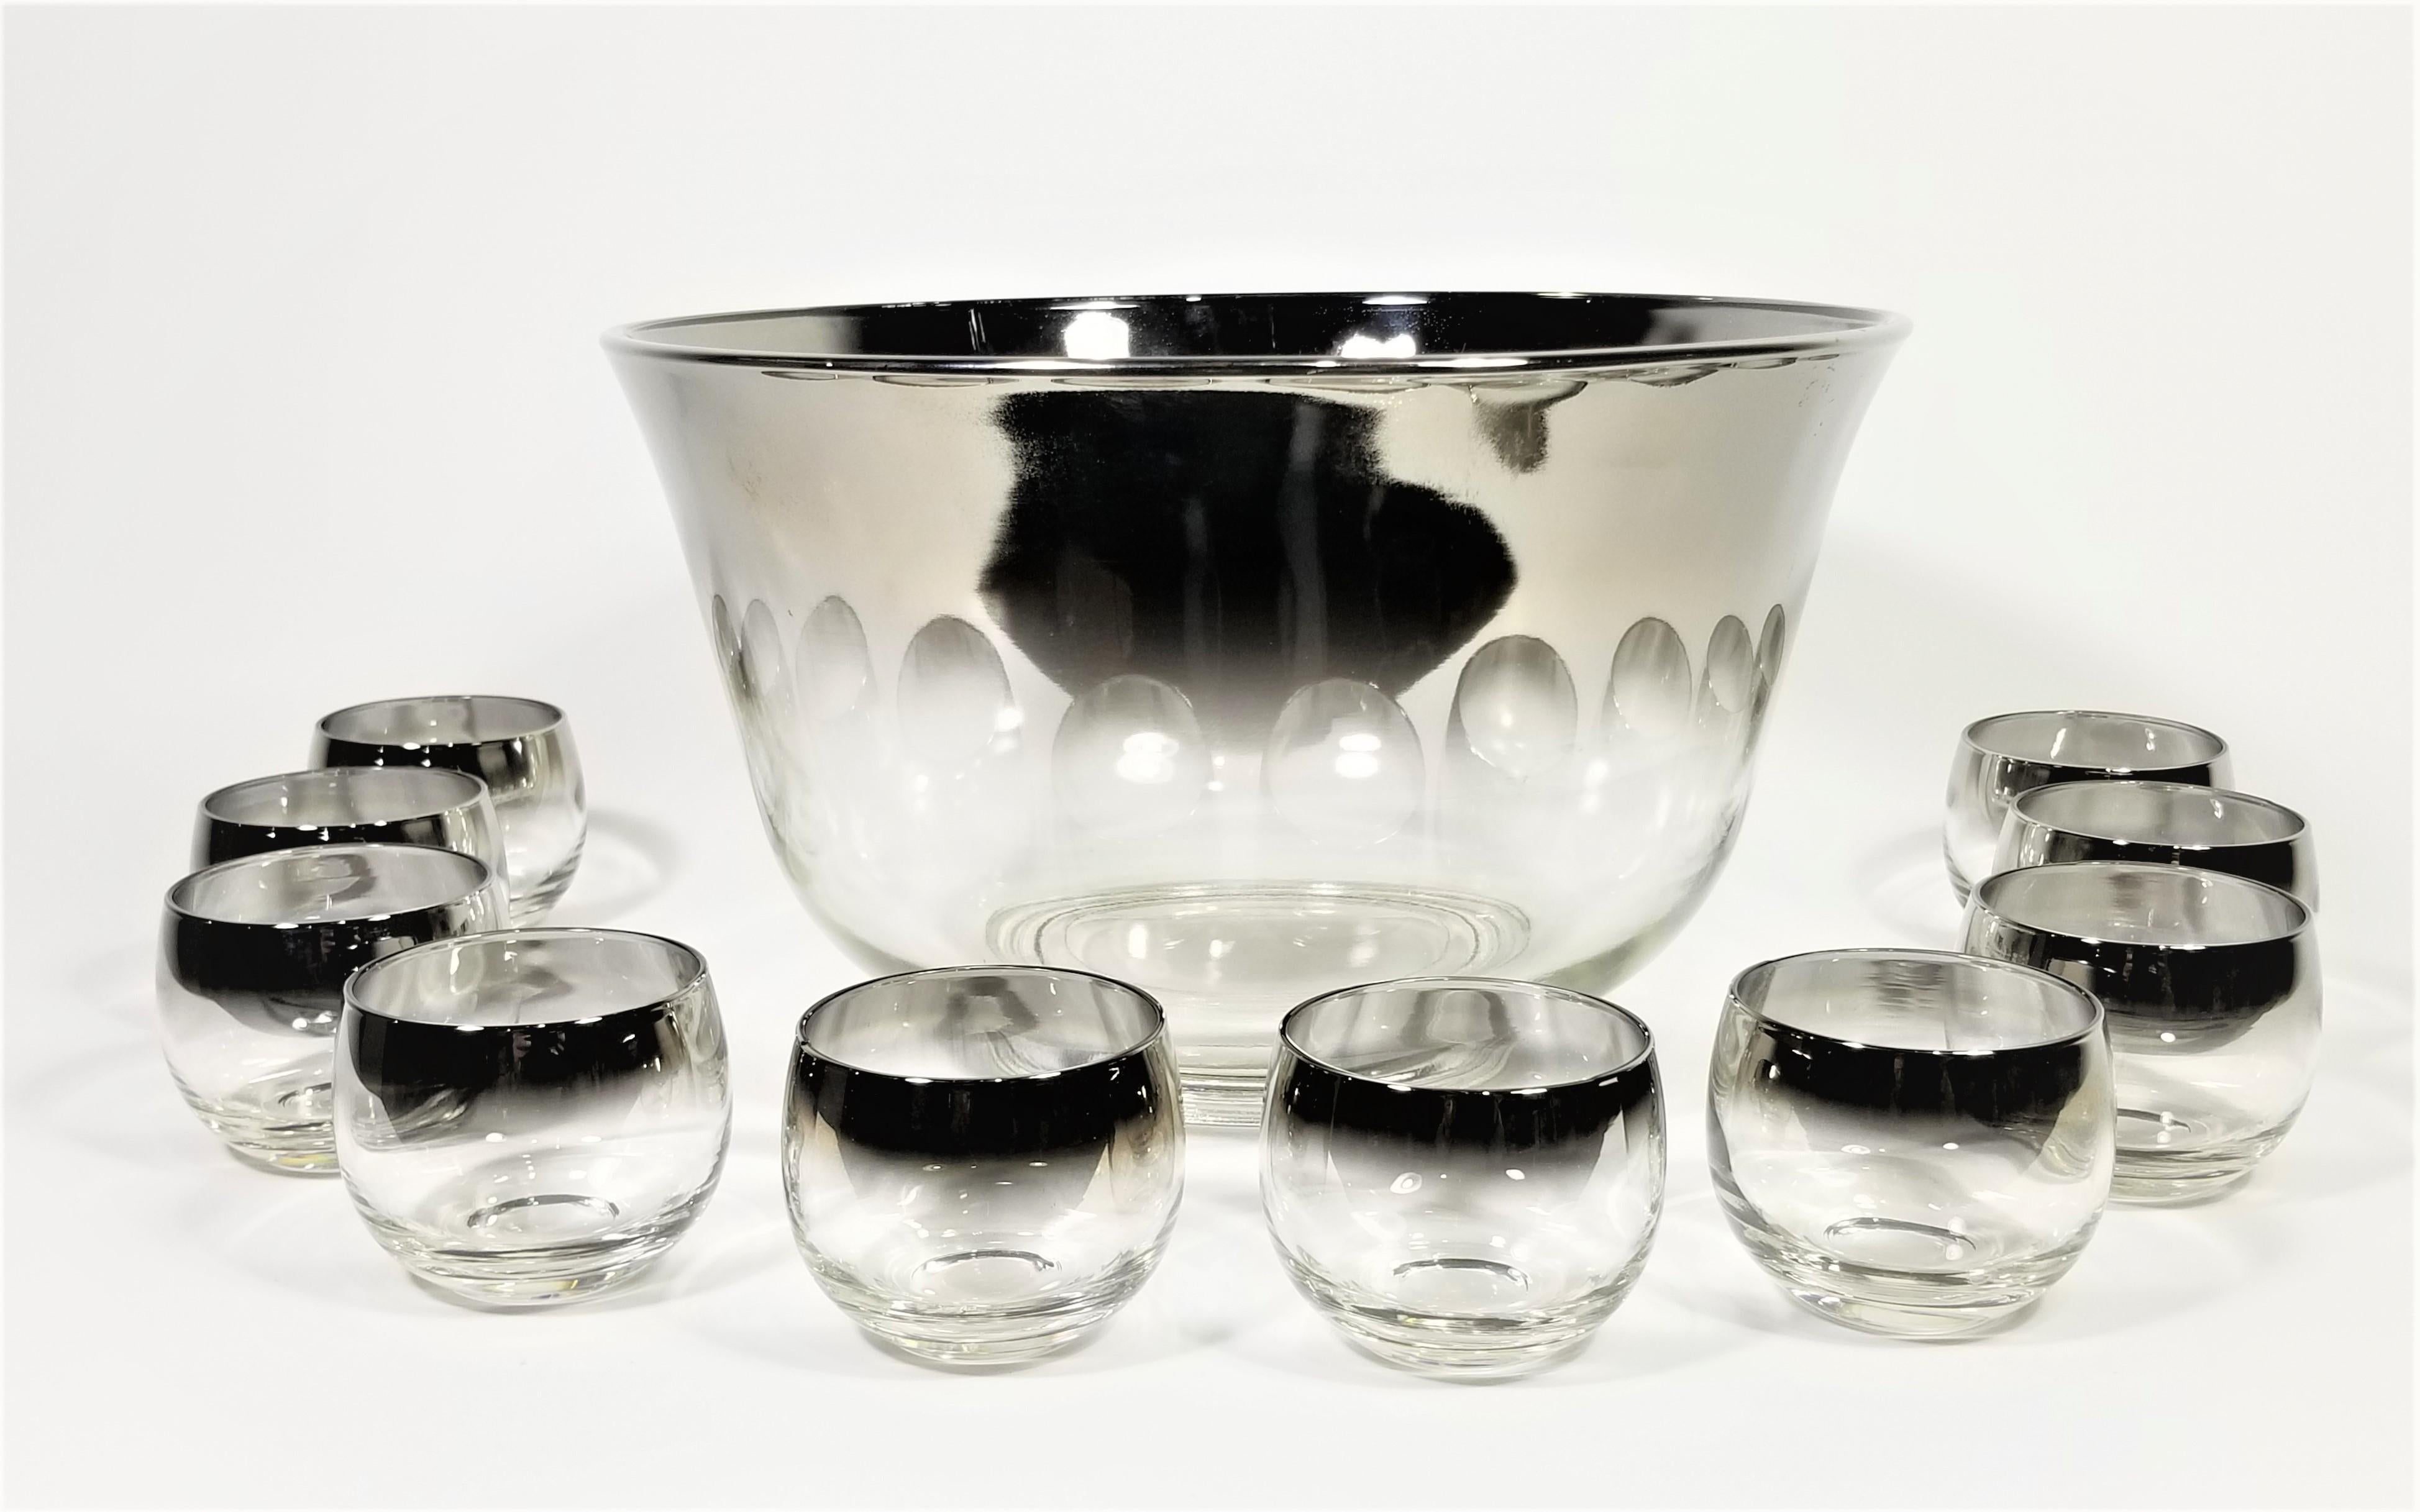 Mid Century 1960s Glassware Barware Set. Silver Fade Design. Glasses often referred as Roly Poly glasses due to their round modern shape. 1 Bowl and 10 glasses and 1 large serving spoon. 


Measurements:
Punch Bowl Height: 6.75 inches
Punch